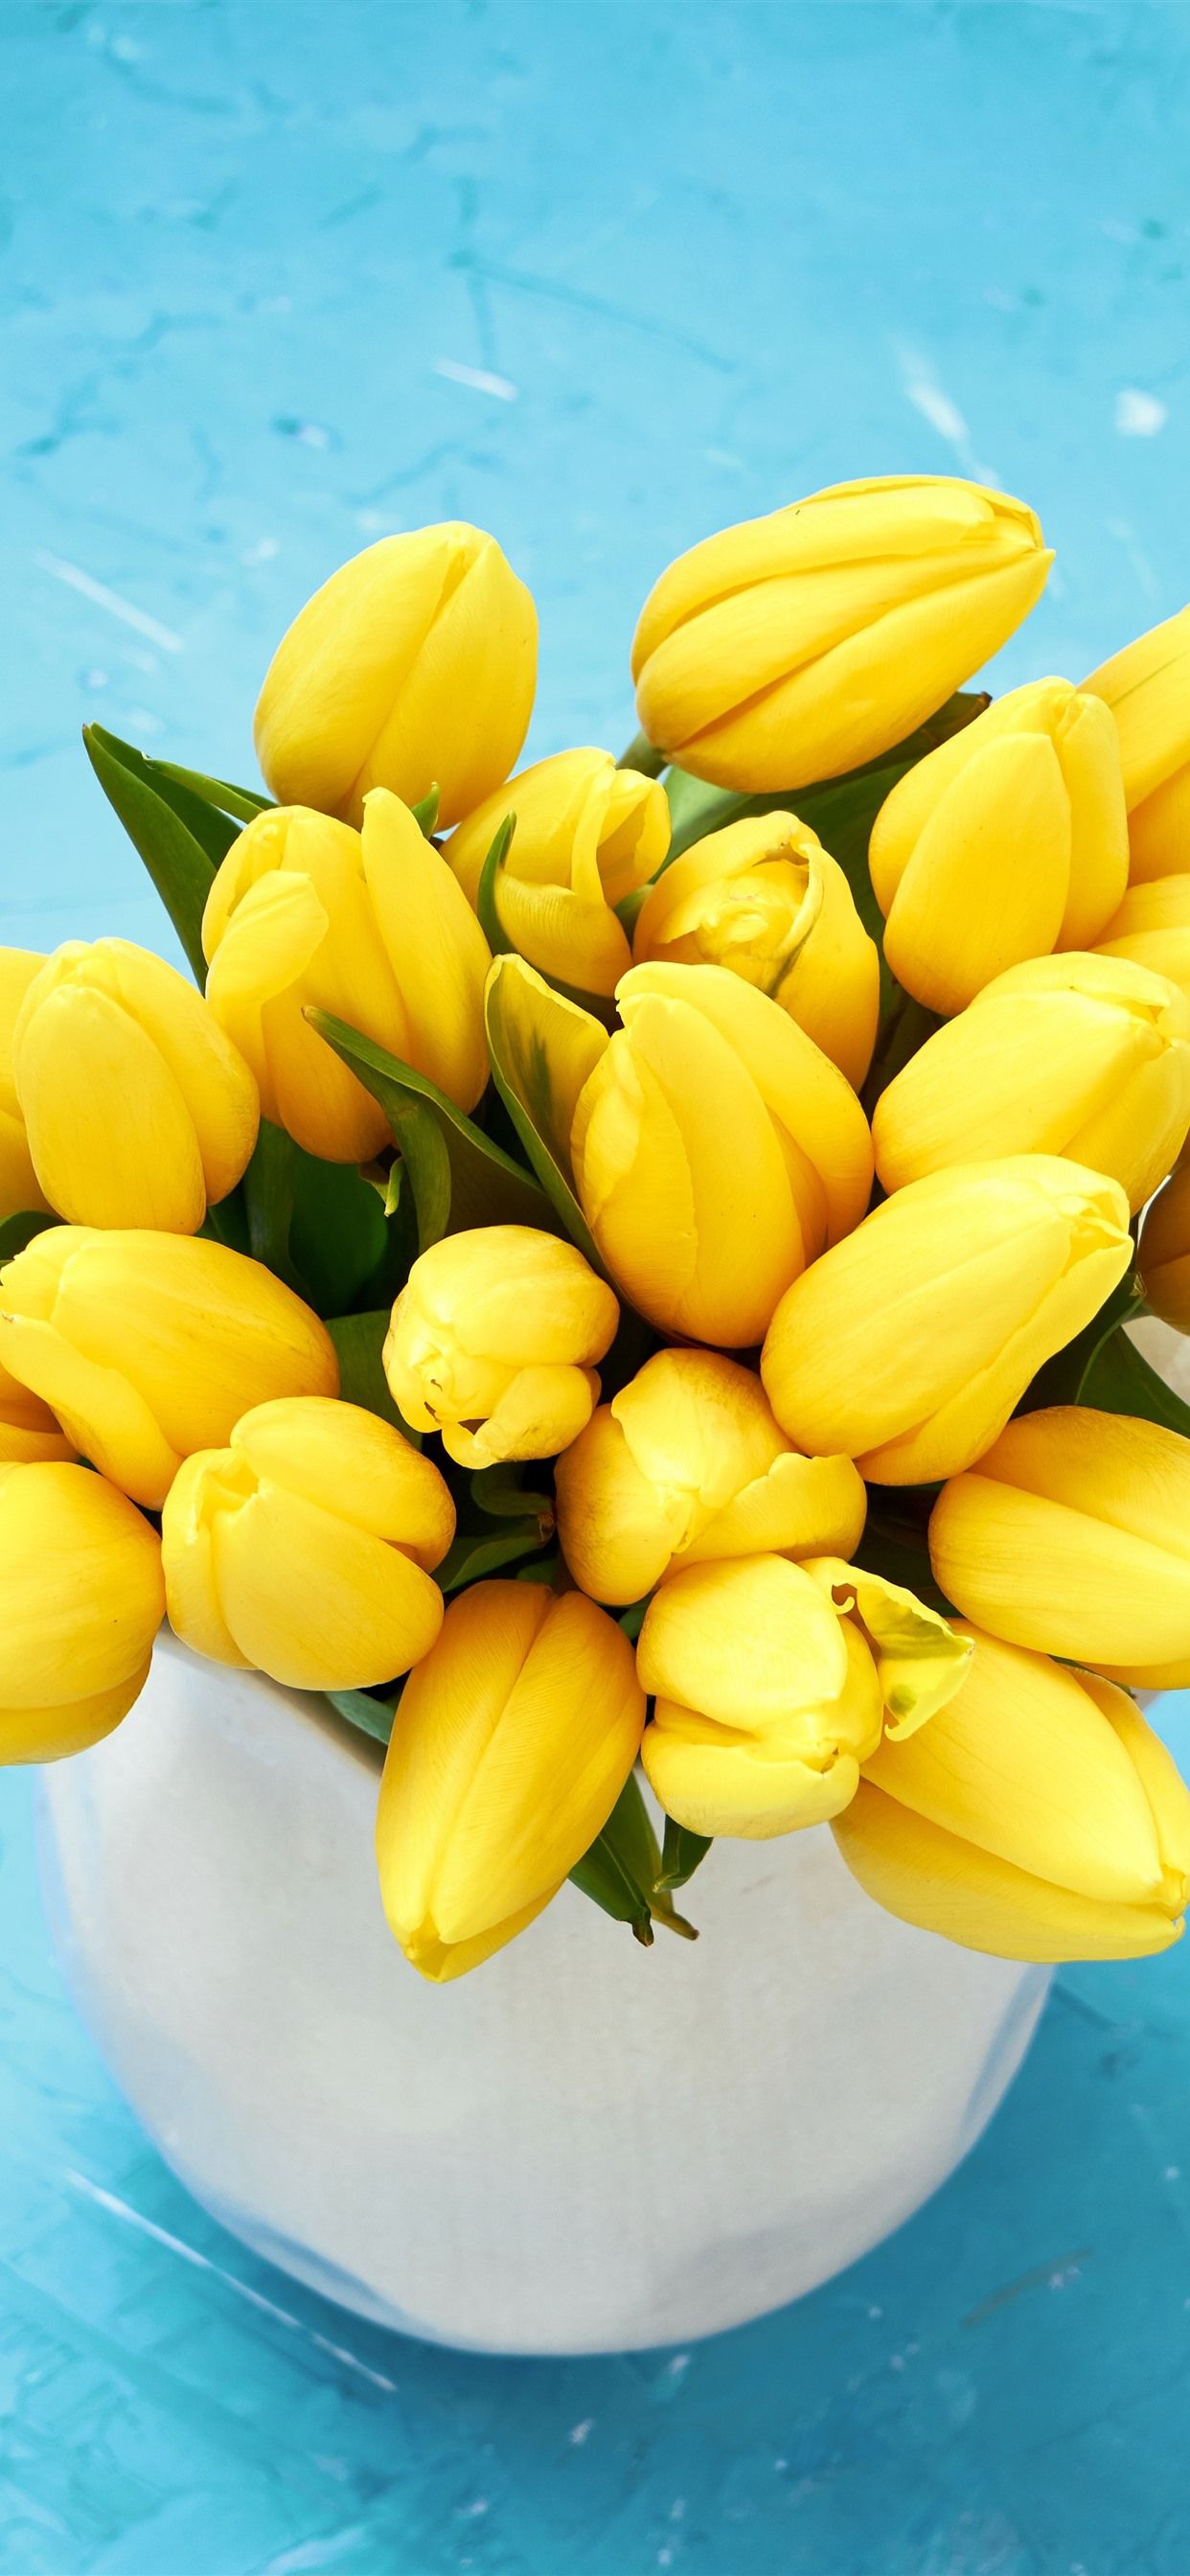 Yellow Tulips, Blue Background 1242x2688 IPhone 11 Pro XS Max